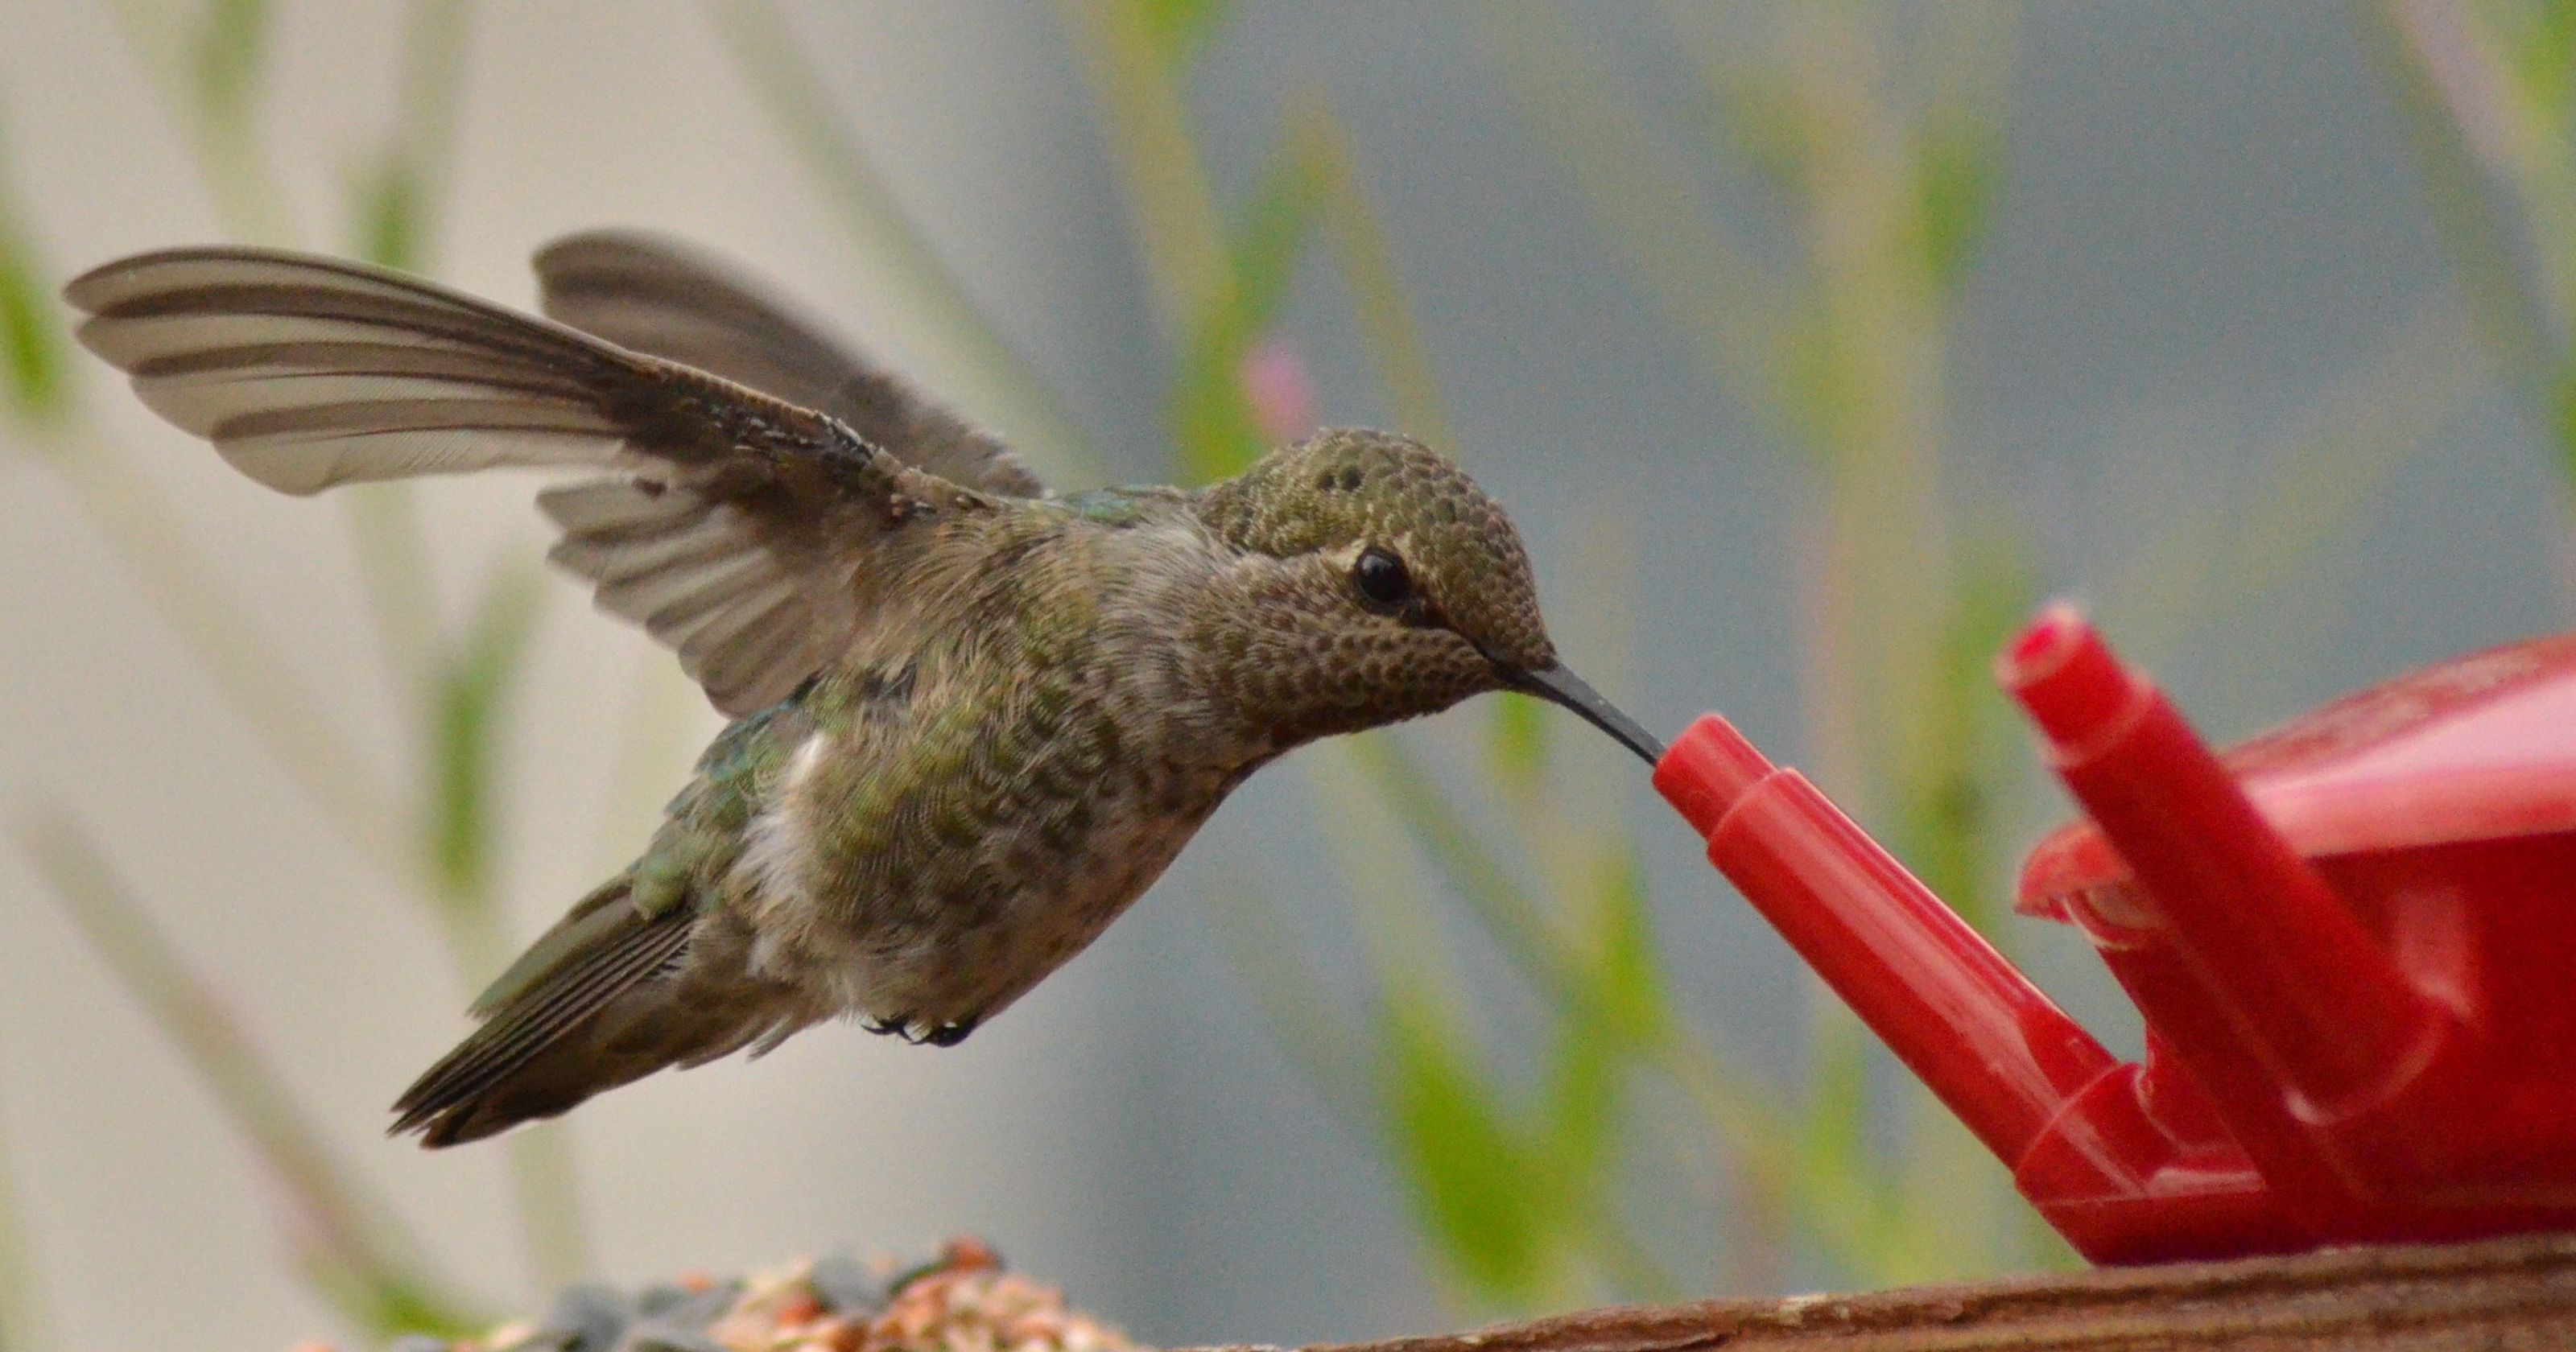 Taking the 'hmmm' out of hummingbird feeders